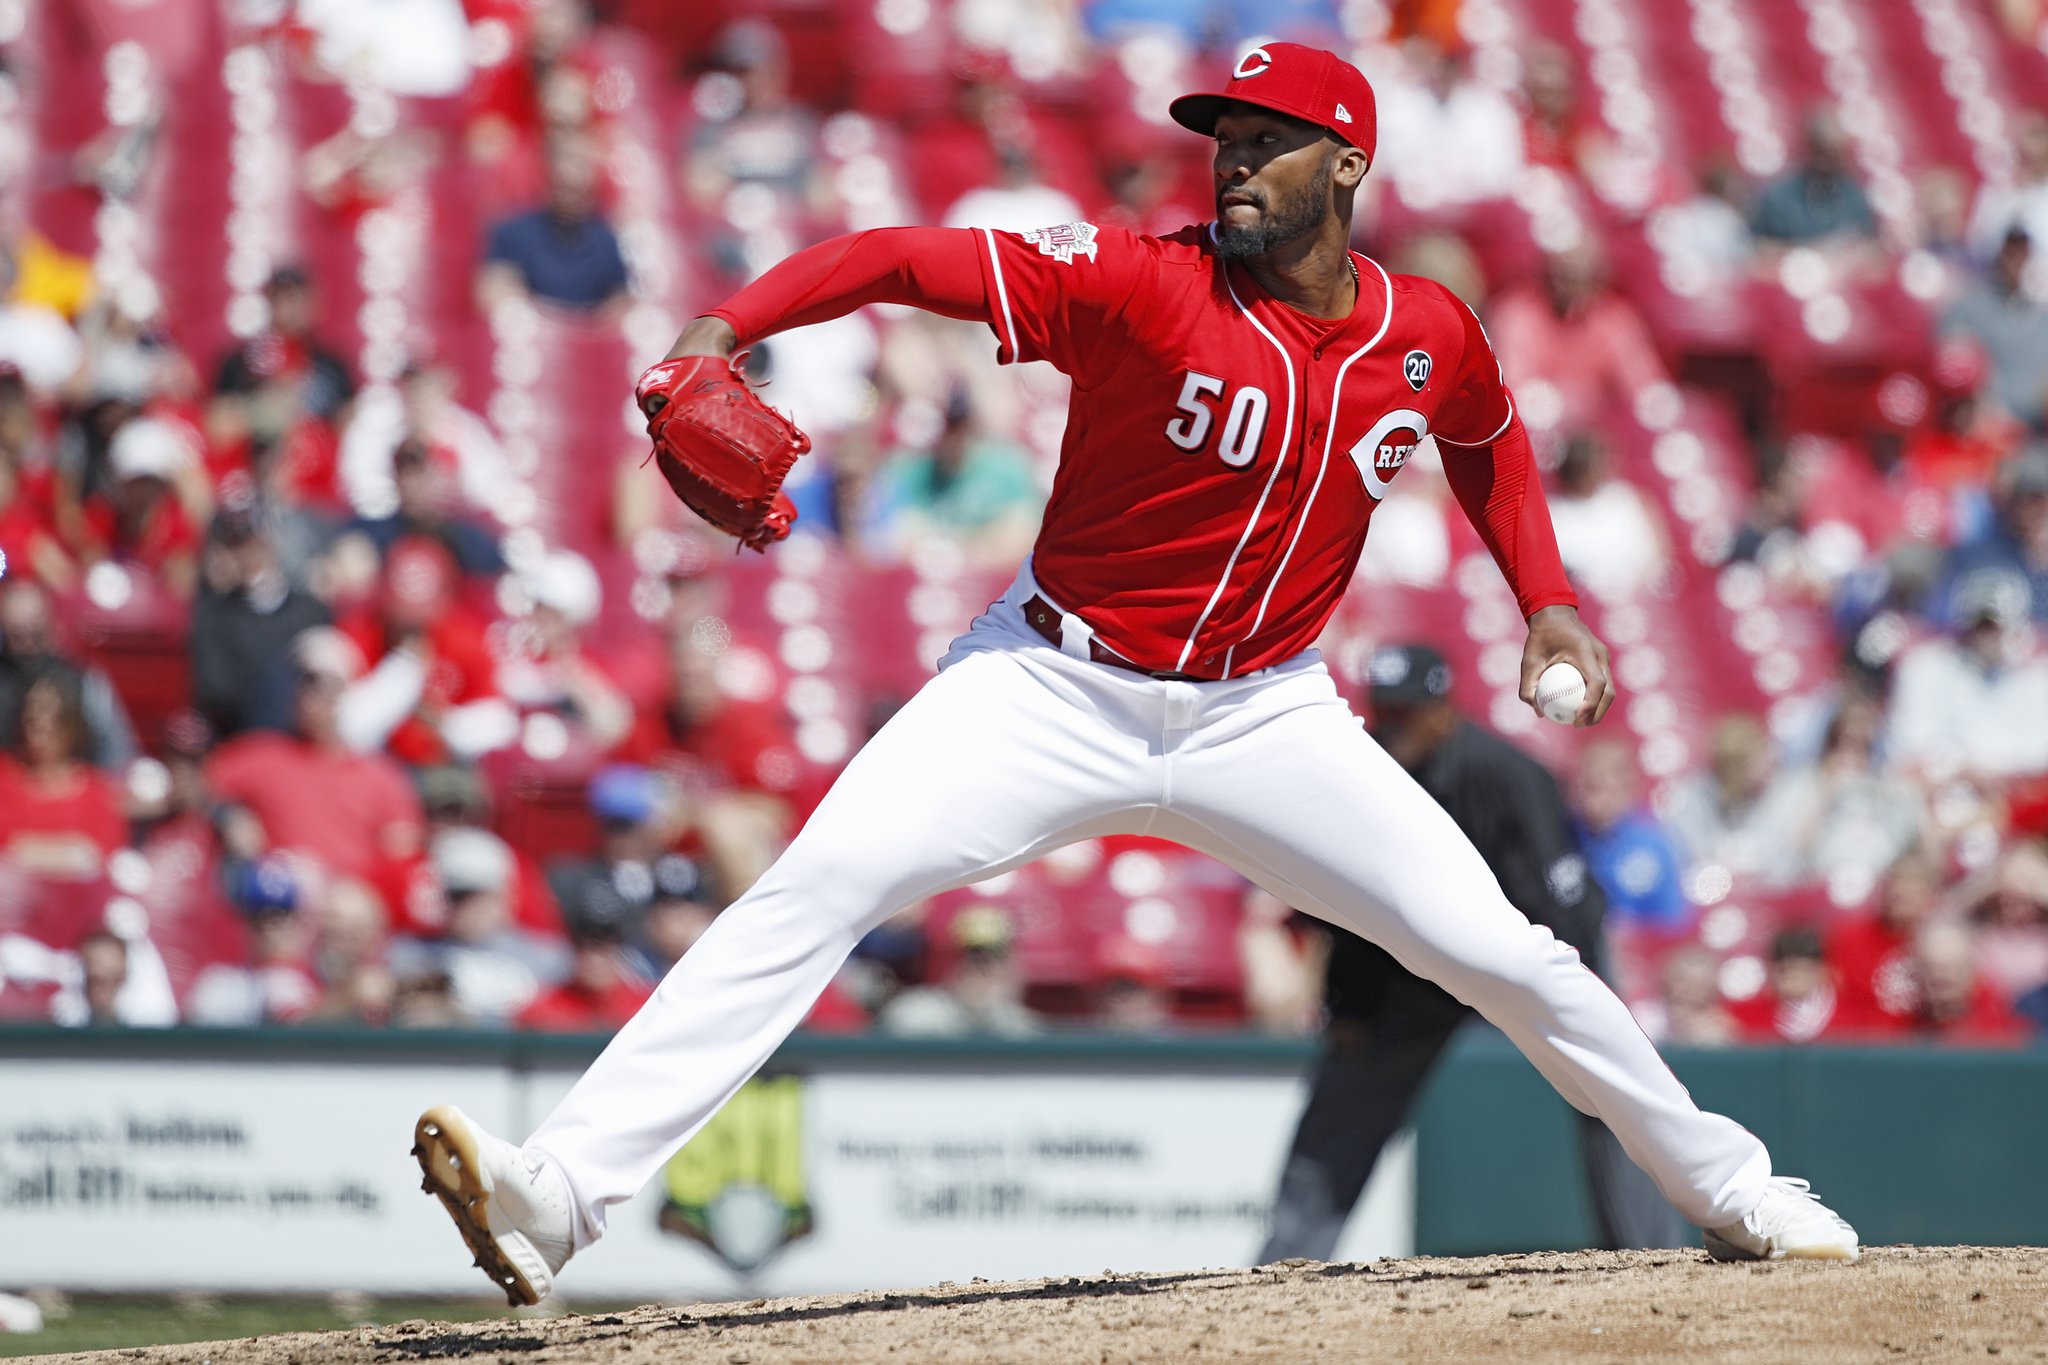 Cincinnati Reds: Wandy Peralta will not be missed after being